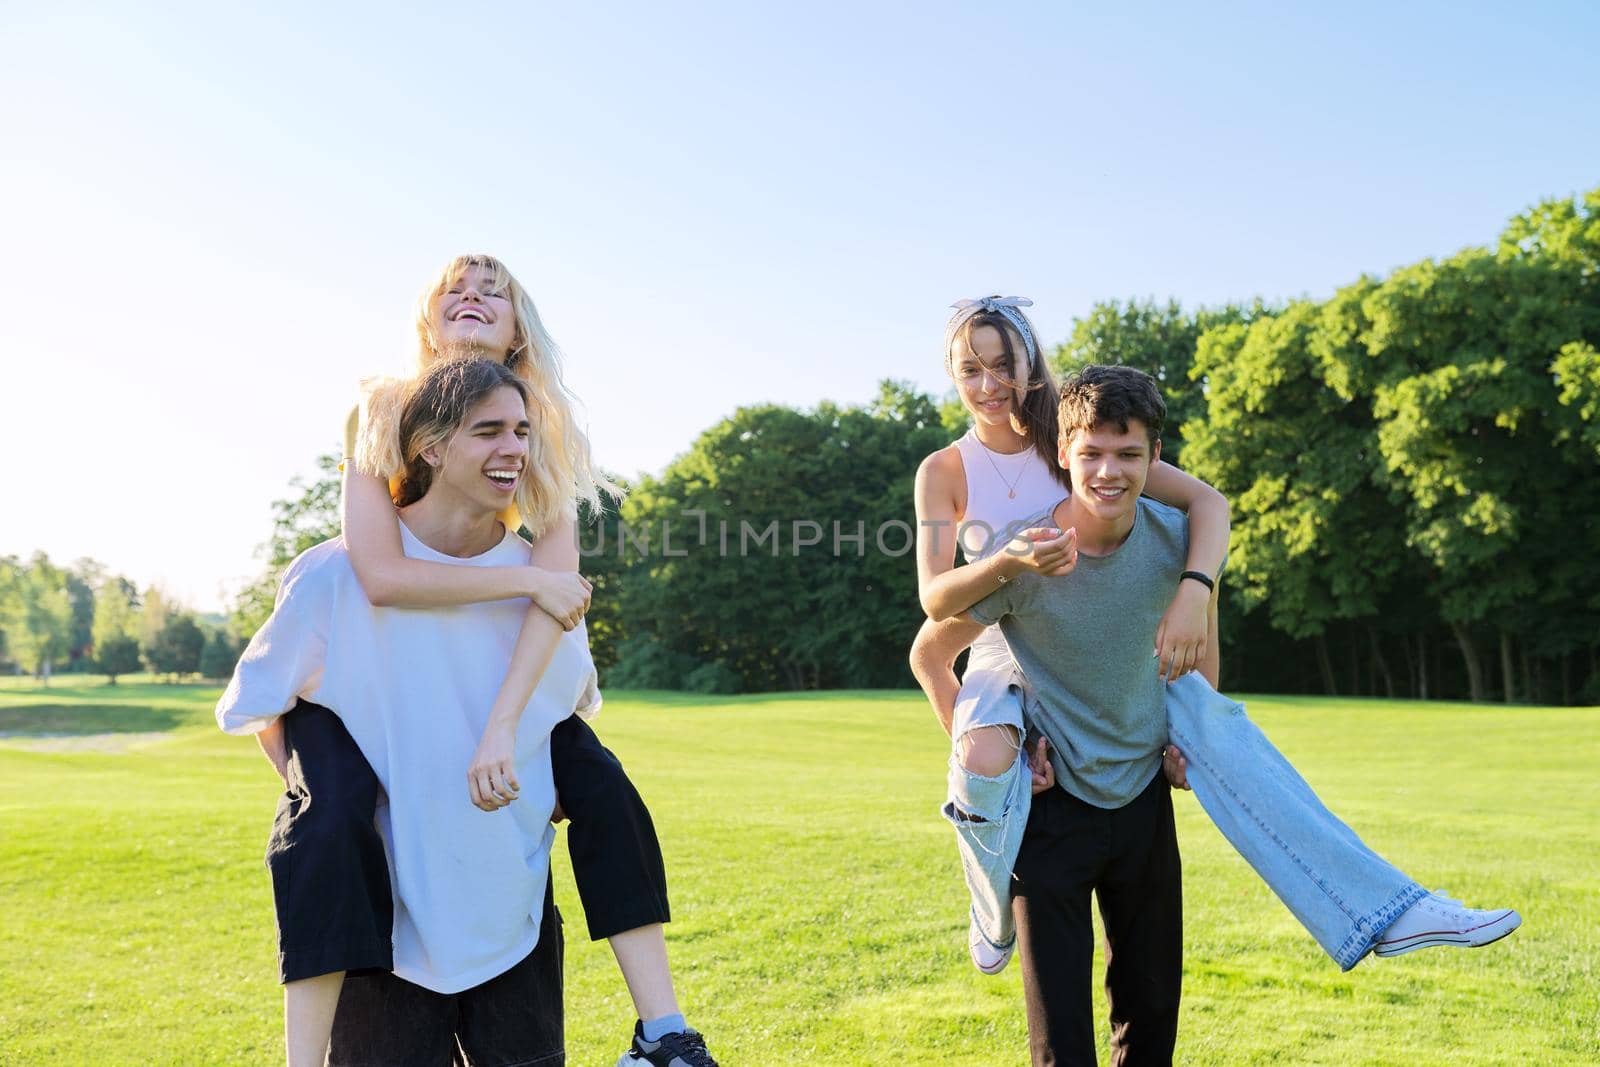 Happy group of teenagers having fun outdoors. Two young laughing couples of teenage friends, outdoors in park, green lawn grass background, sunny summer day. Adolescence, youth, friendship, young people